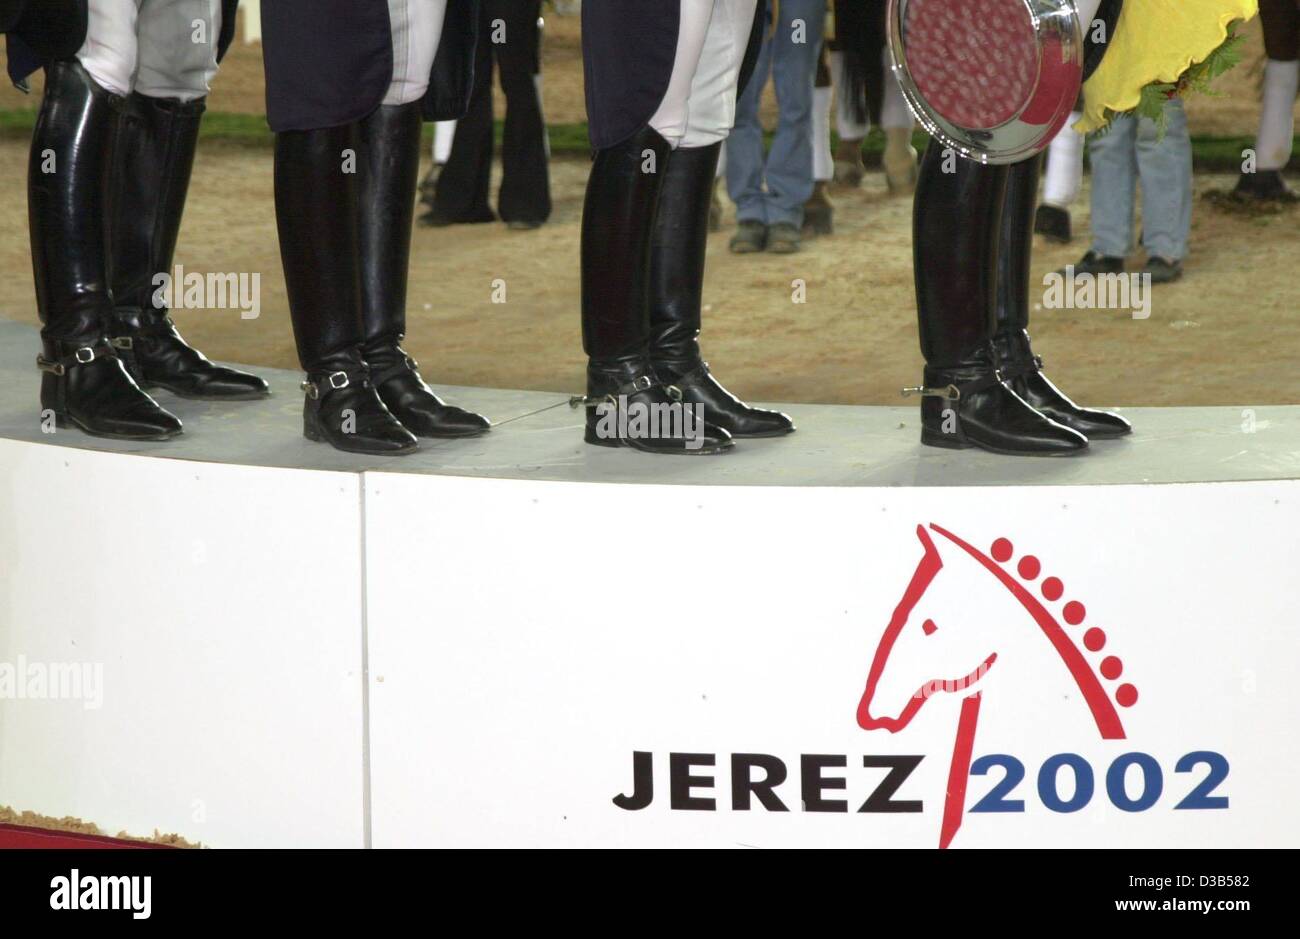 (dpa) - The boots of the German dressage equipe are seen as the riders stand on the podium, at the World Equestrian Games in Jerez, Spain, 12 September 2002. L-R: Klaus Husenbeth, Ulla Salzgeber, Nadine Capellmann and Ann Kathrin Linsenhoff. Stock Photo